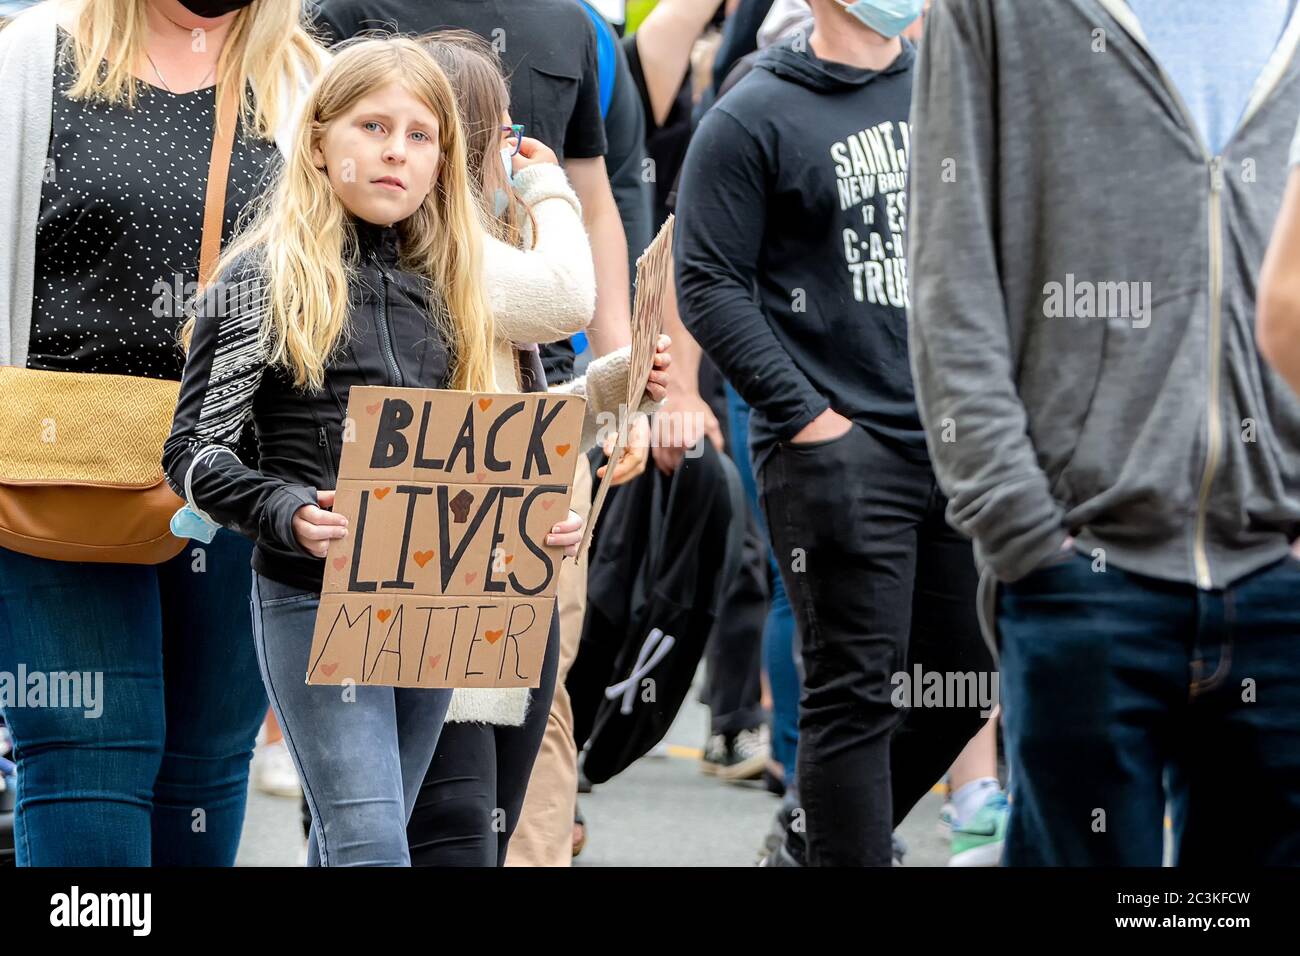 Saint John, NB, Canada - June 14, 2020: A young caucasian teen carries a Black Lives Matter sign as she marches in a rally. Stock Photo